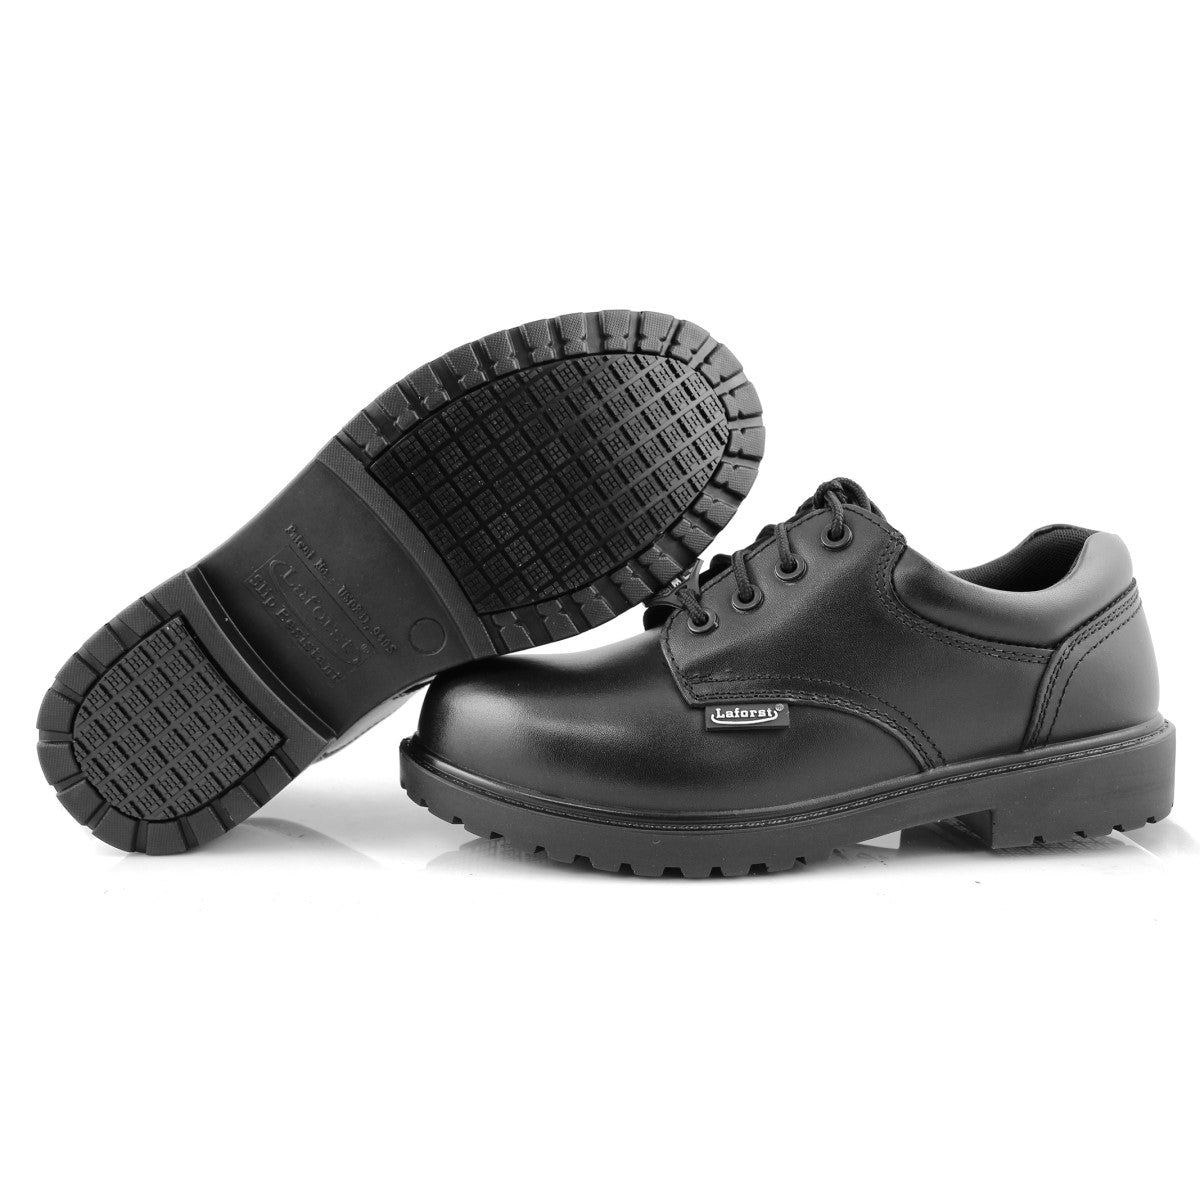 Gater 9420-01 / Composite Safety Toe